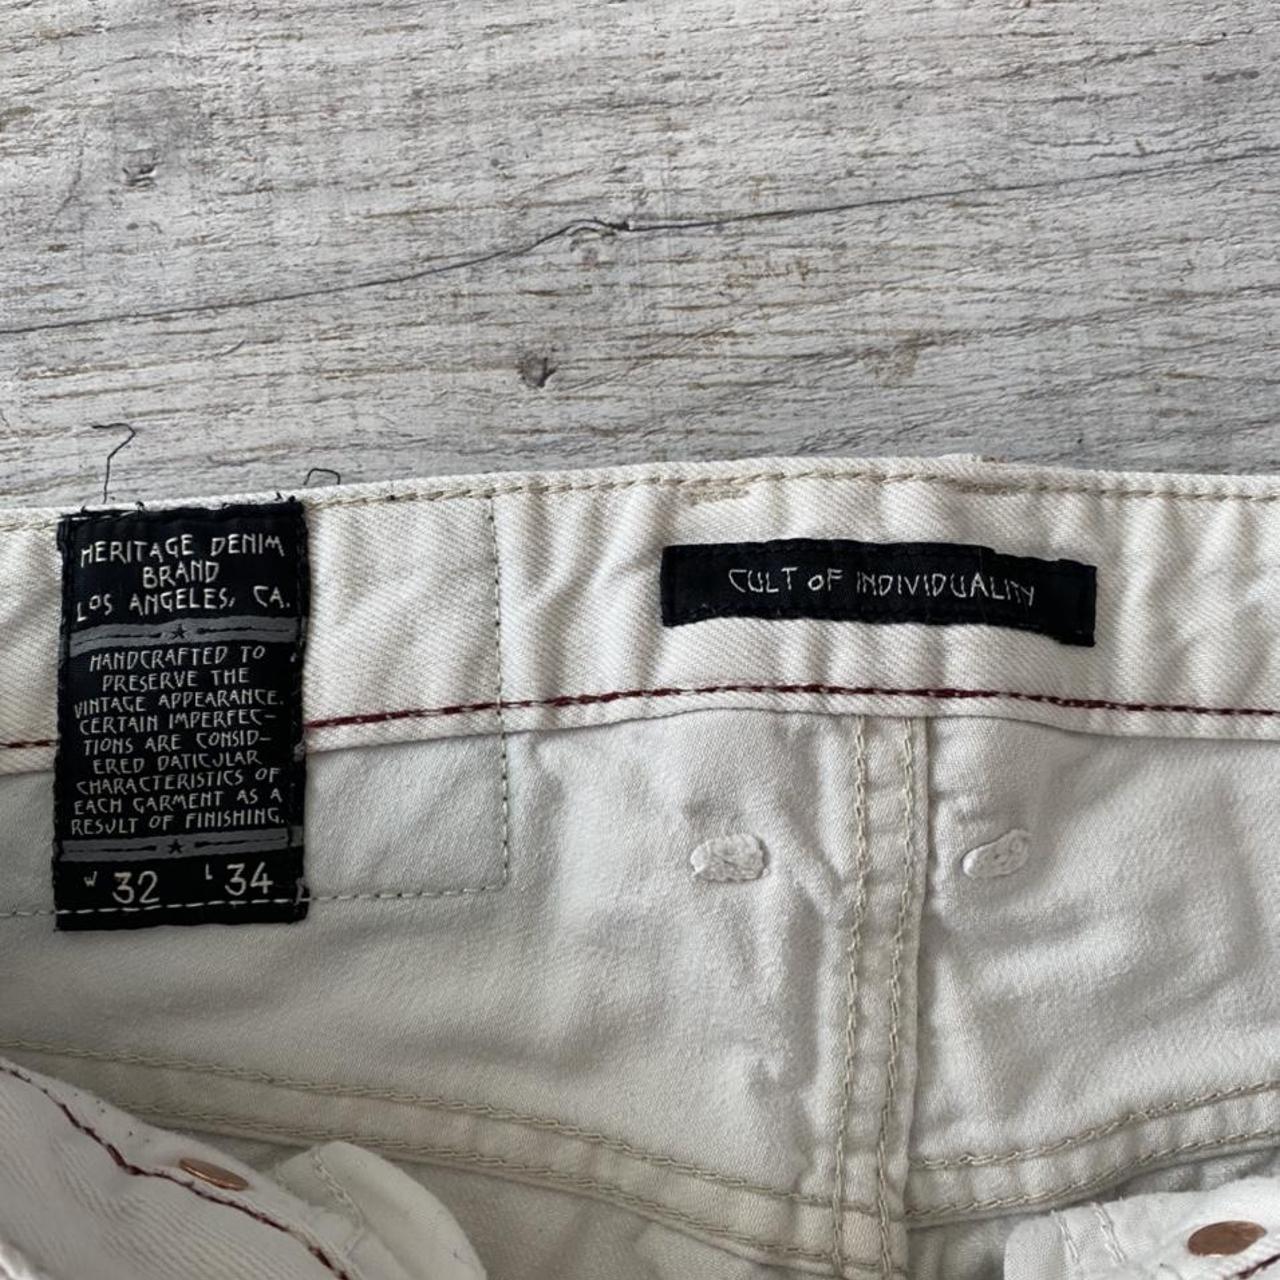 Cult of Individuality Men's White Jeans (2)